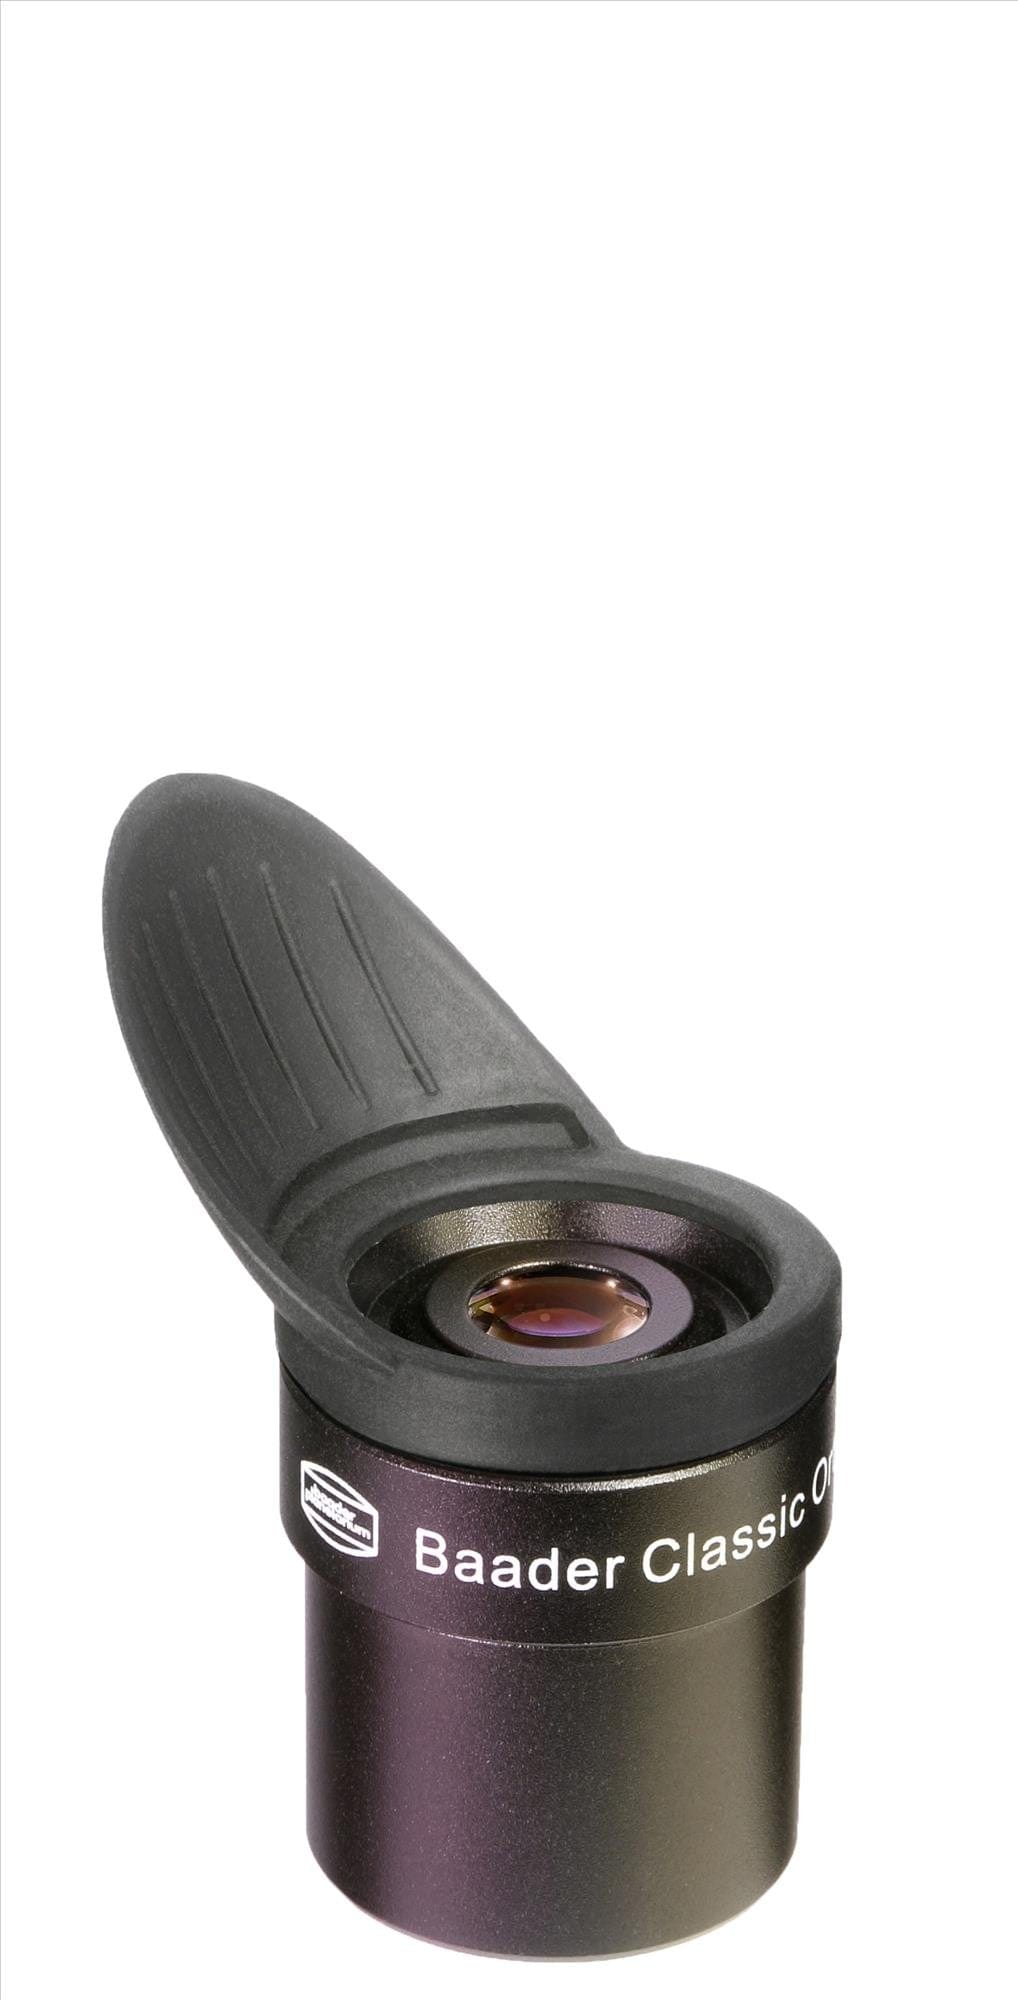 Baader Planetarium Accessory Baader Classic Ortho 6mm, 10mm, 18mm 1¼" Eyepiece (HT-MC) - 2954106